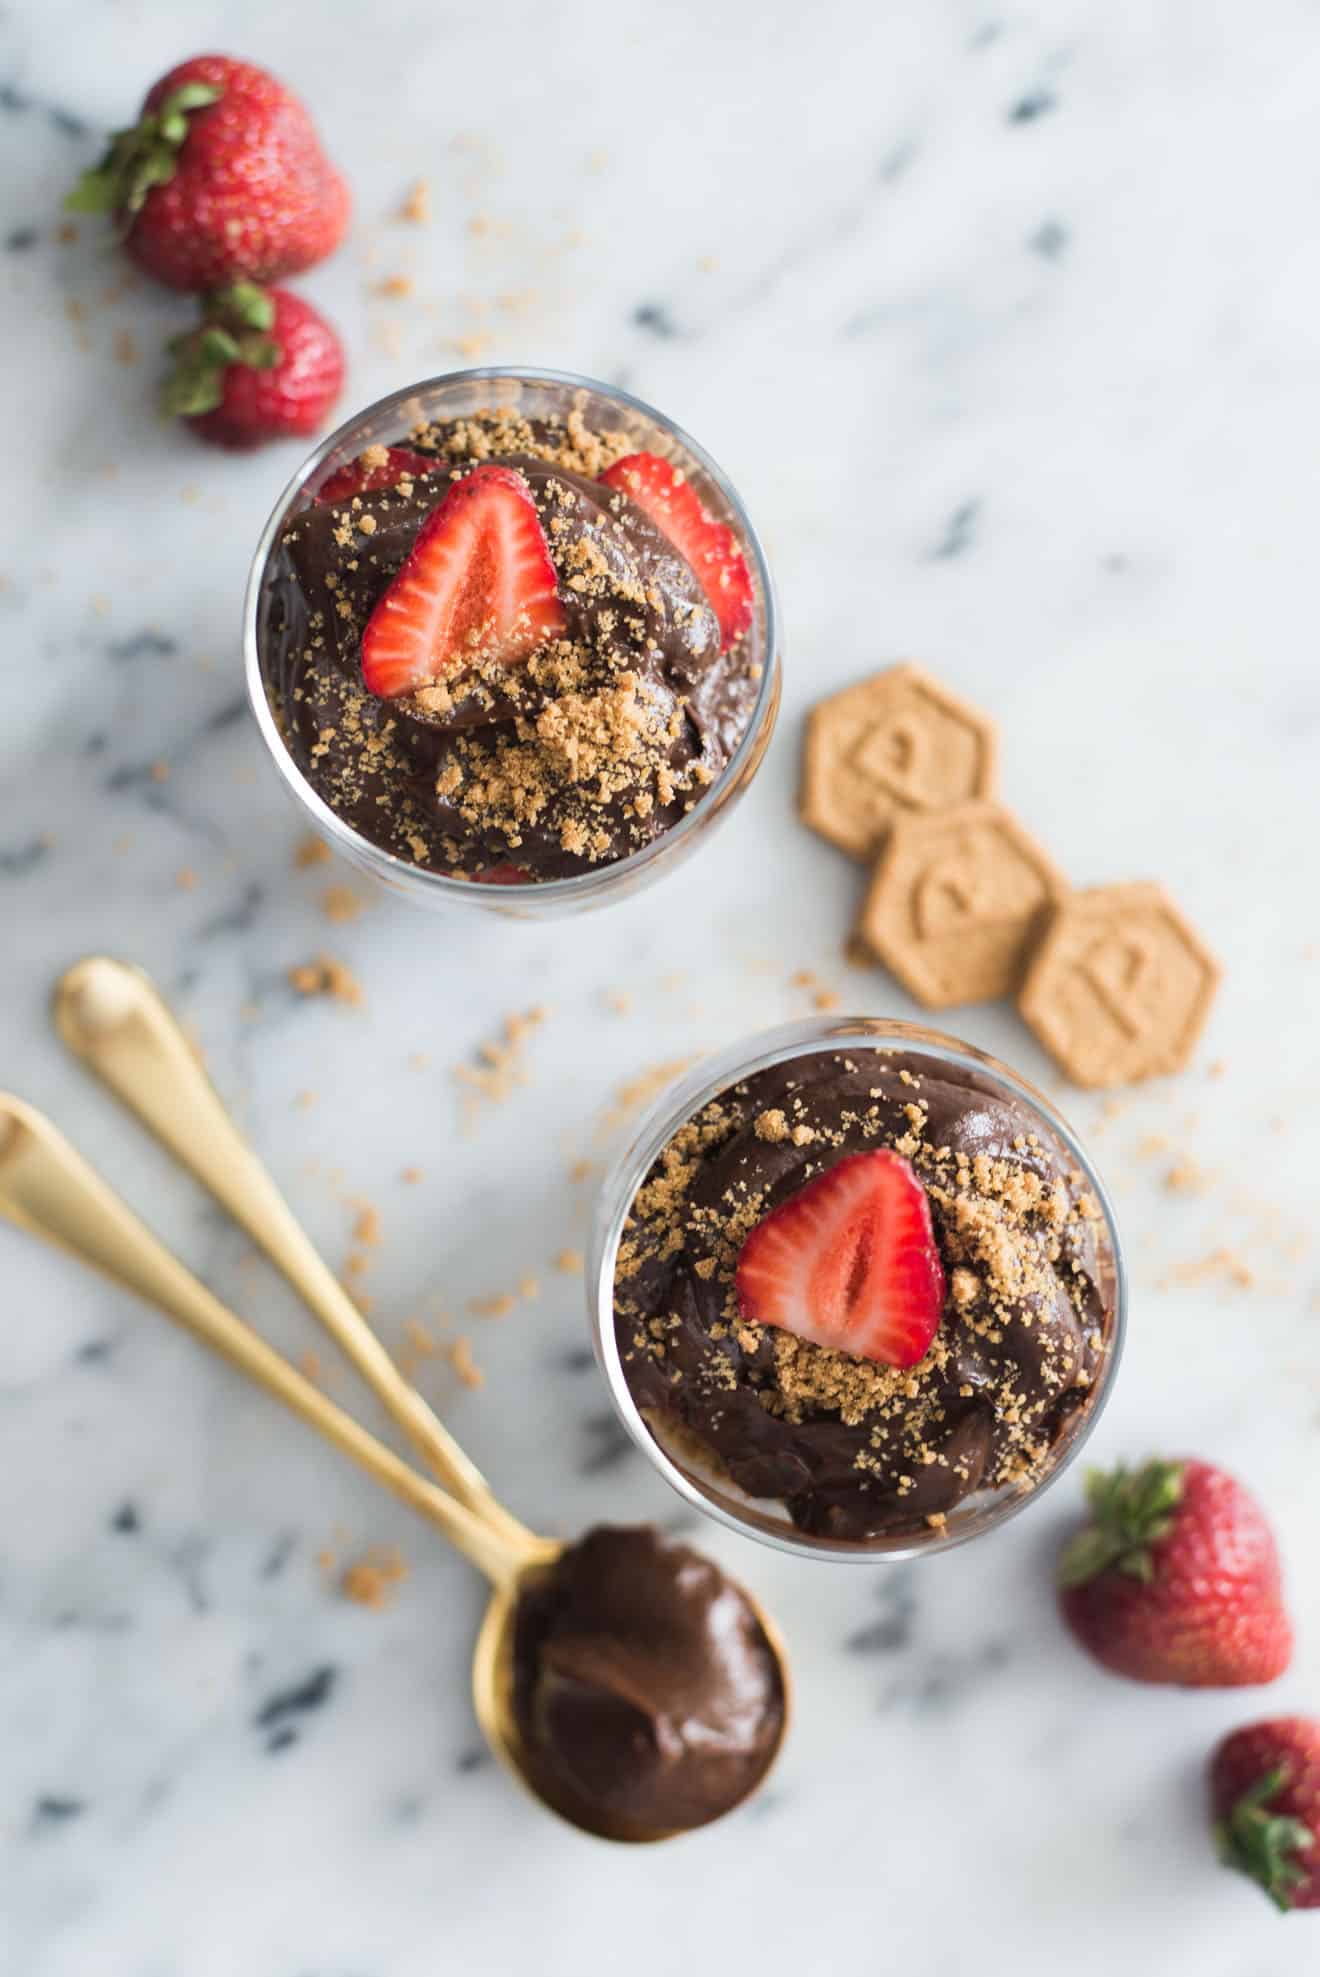 Avocado Chocolate Mousse with Graham Cracker Crust - This healthy avocado chocolate mousse is the perfect dessert. Requires only 6 ingredients to make! by @healthynibs